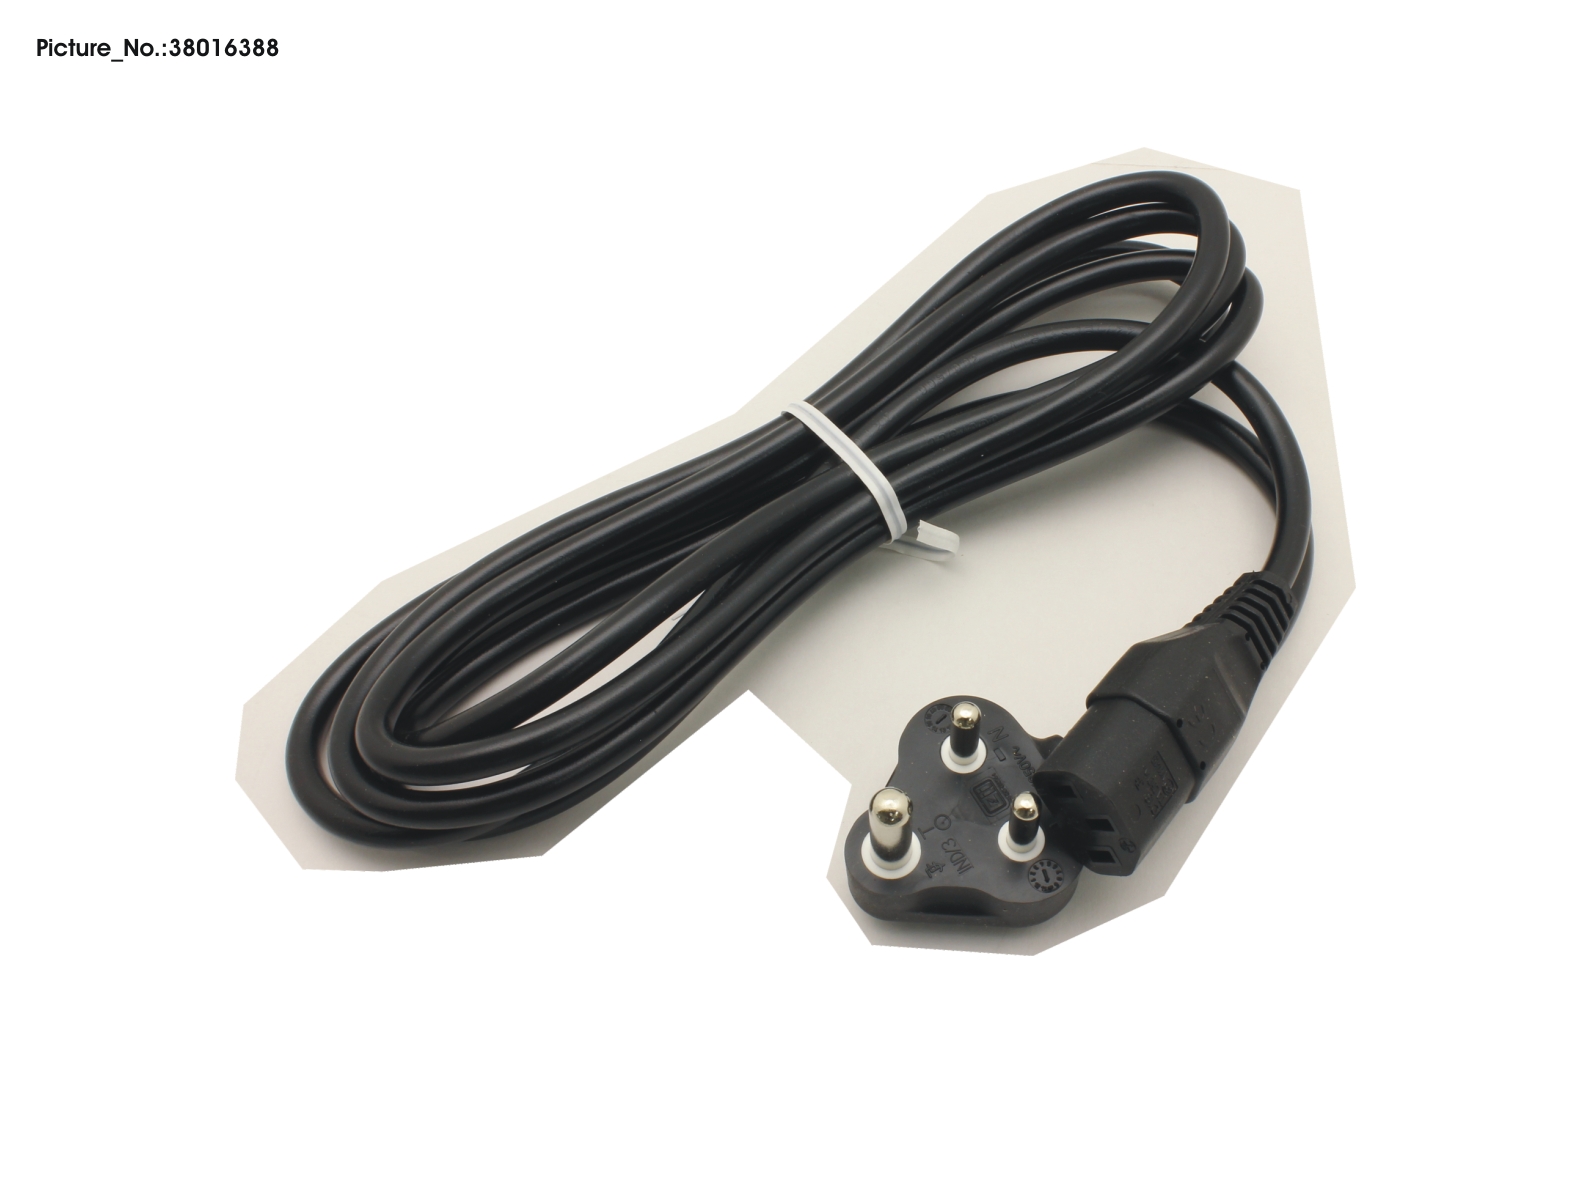 POWER CABLE INDIEN 3P 1,8